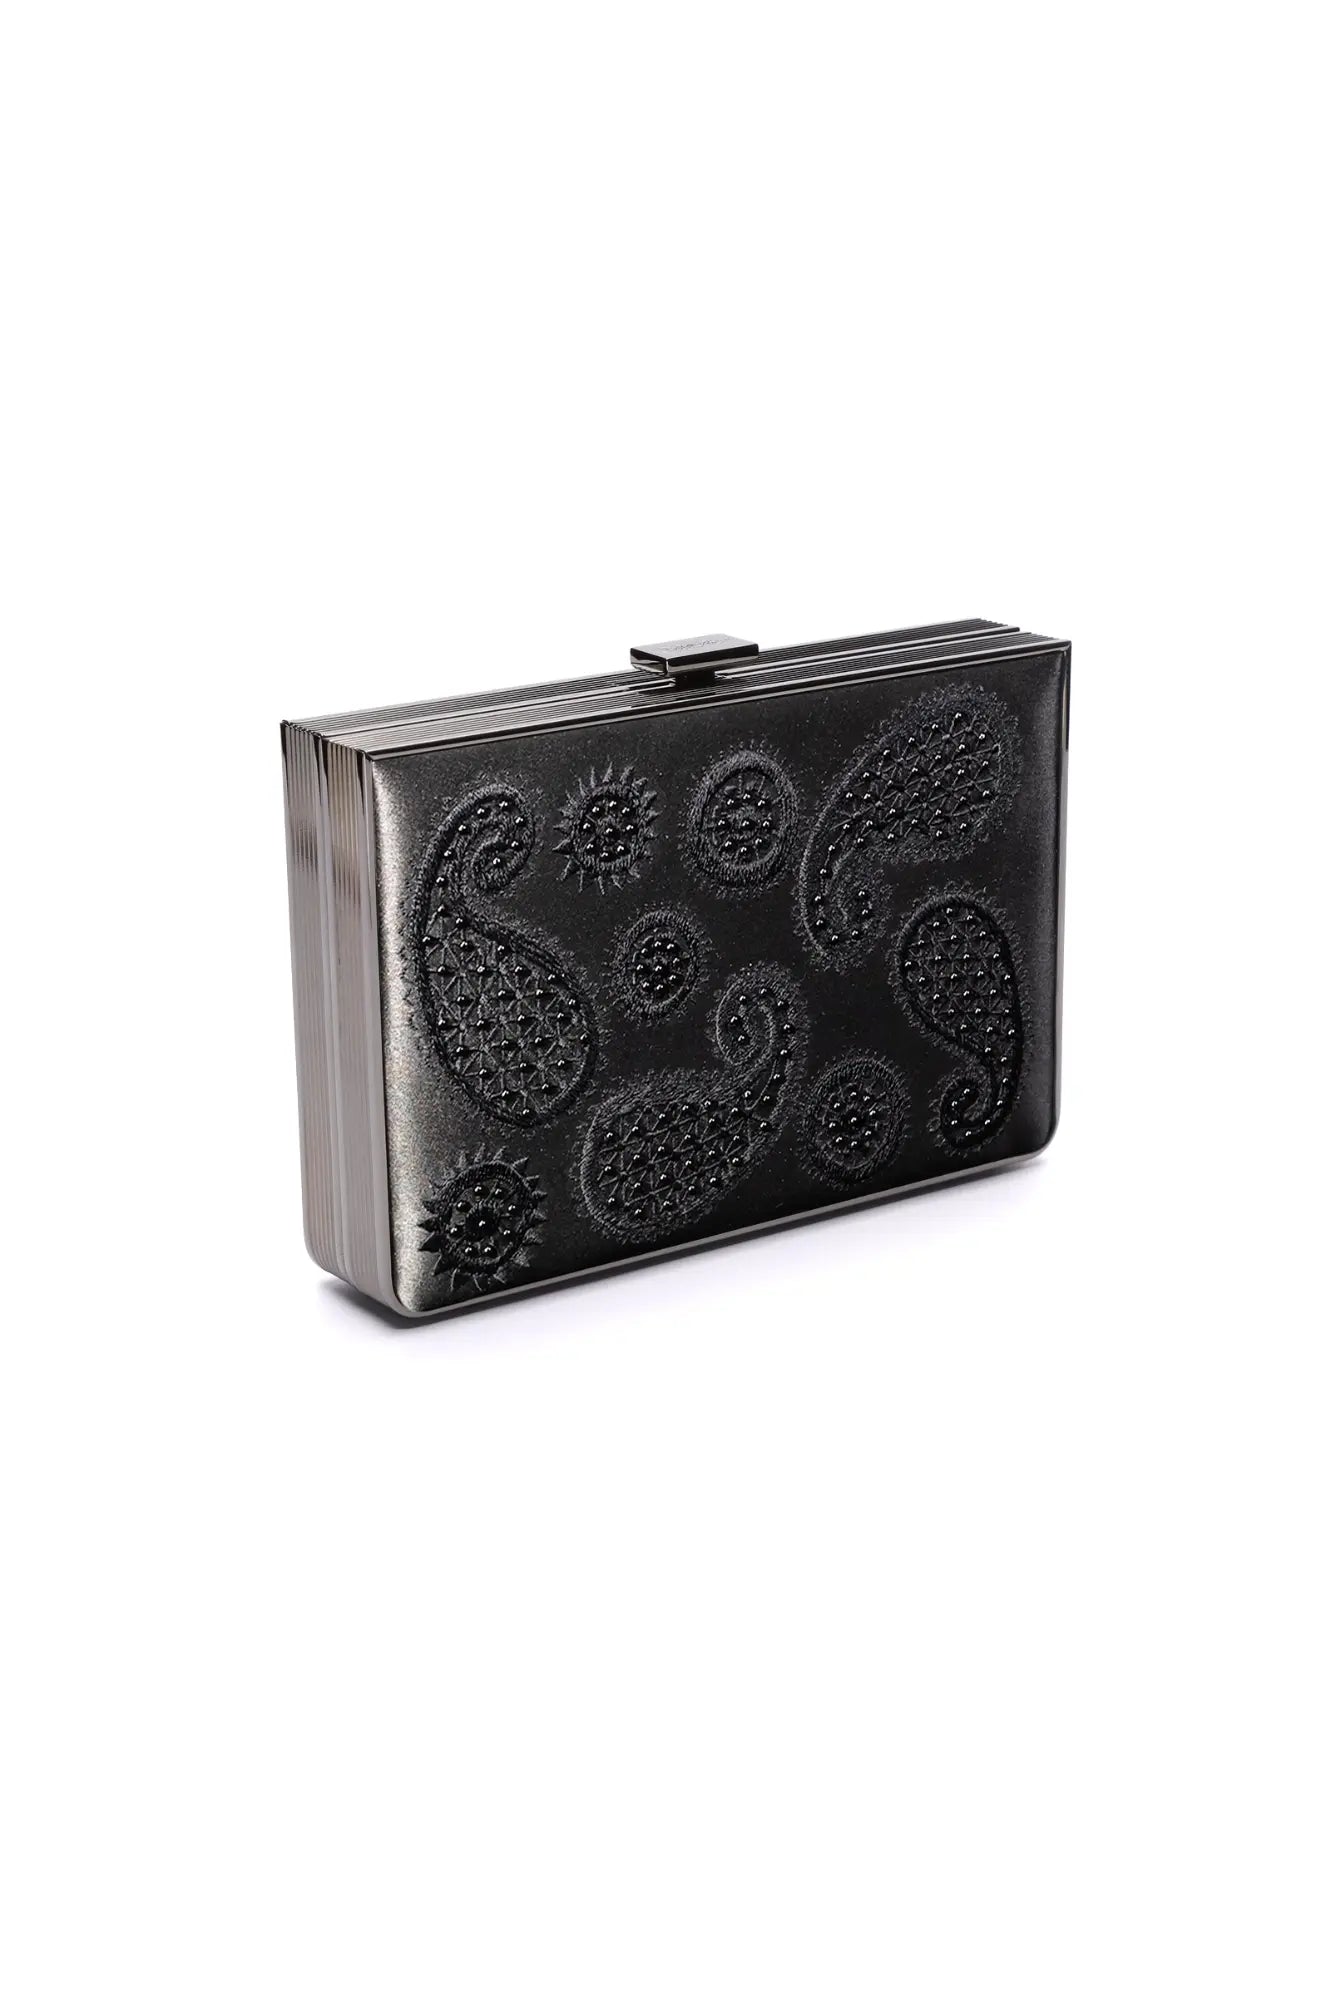 Black Venezia Clutch x MICAELA - Black Satin Paisley Embroidery against a white background from The Bella Rosa Collection.